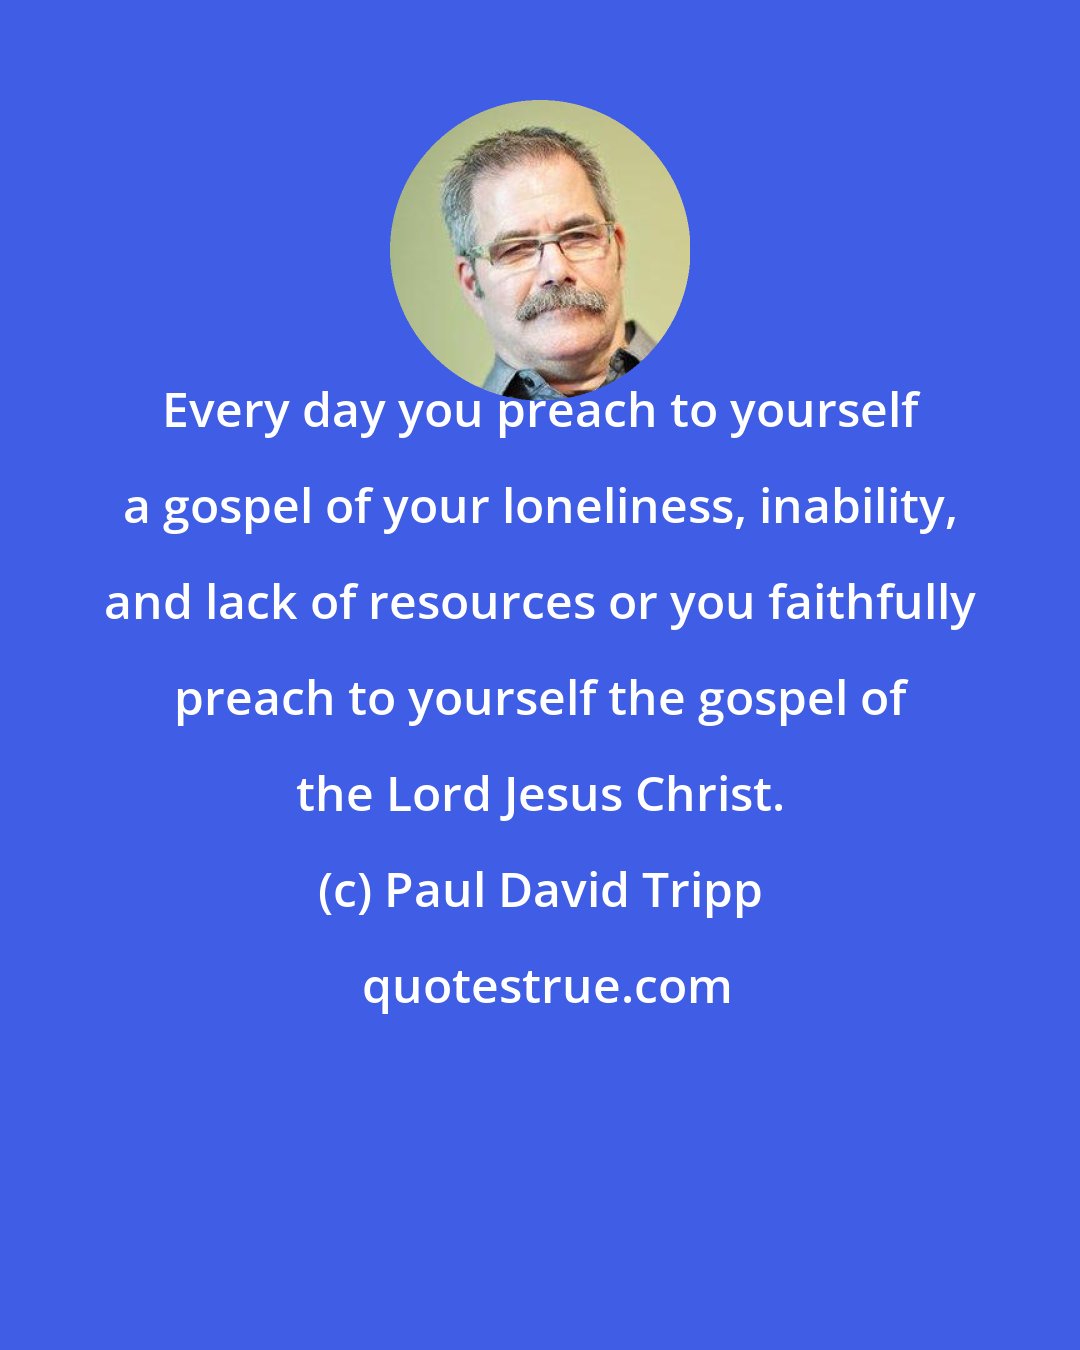 Paul David Tripp: Every day you preach to yourself a gospel of your loneliness, inability, and lack of resources or you faithfully preach to yourself the gospel of the Lord Jesus Christ.